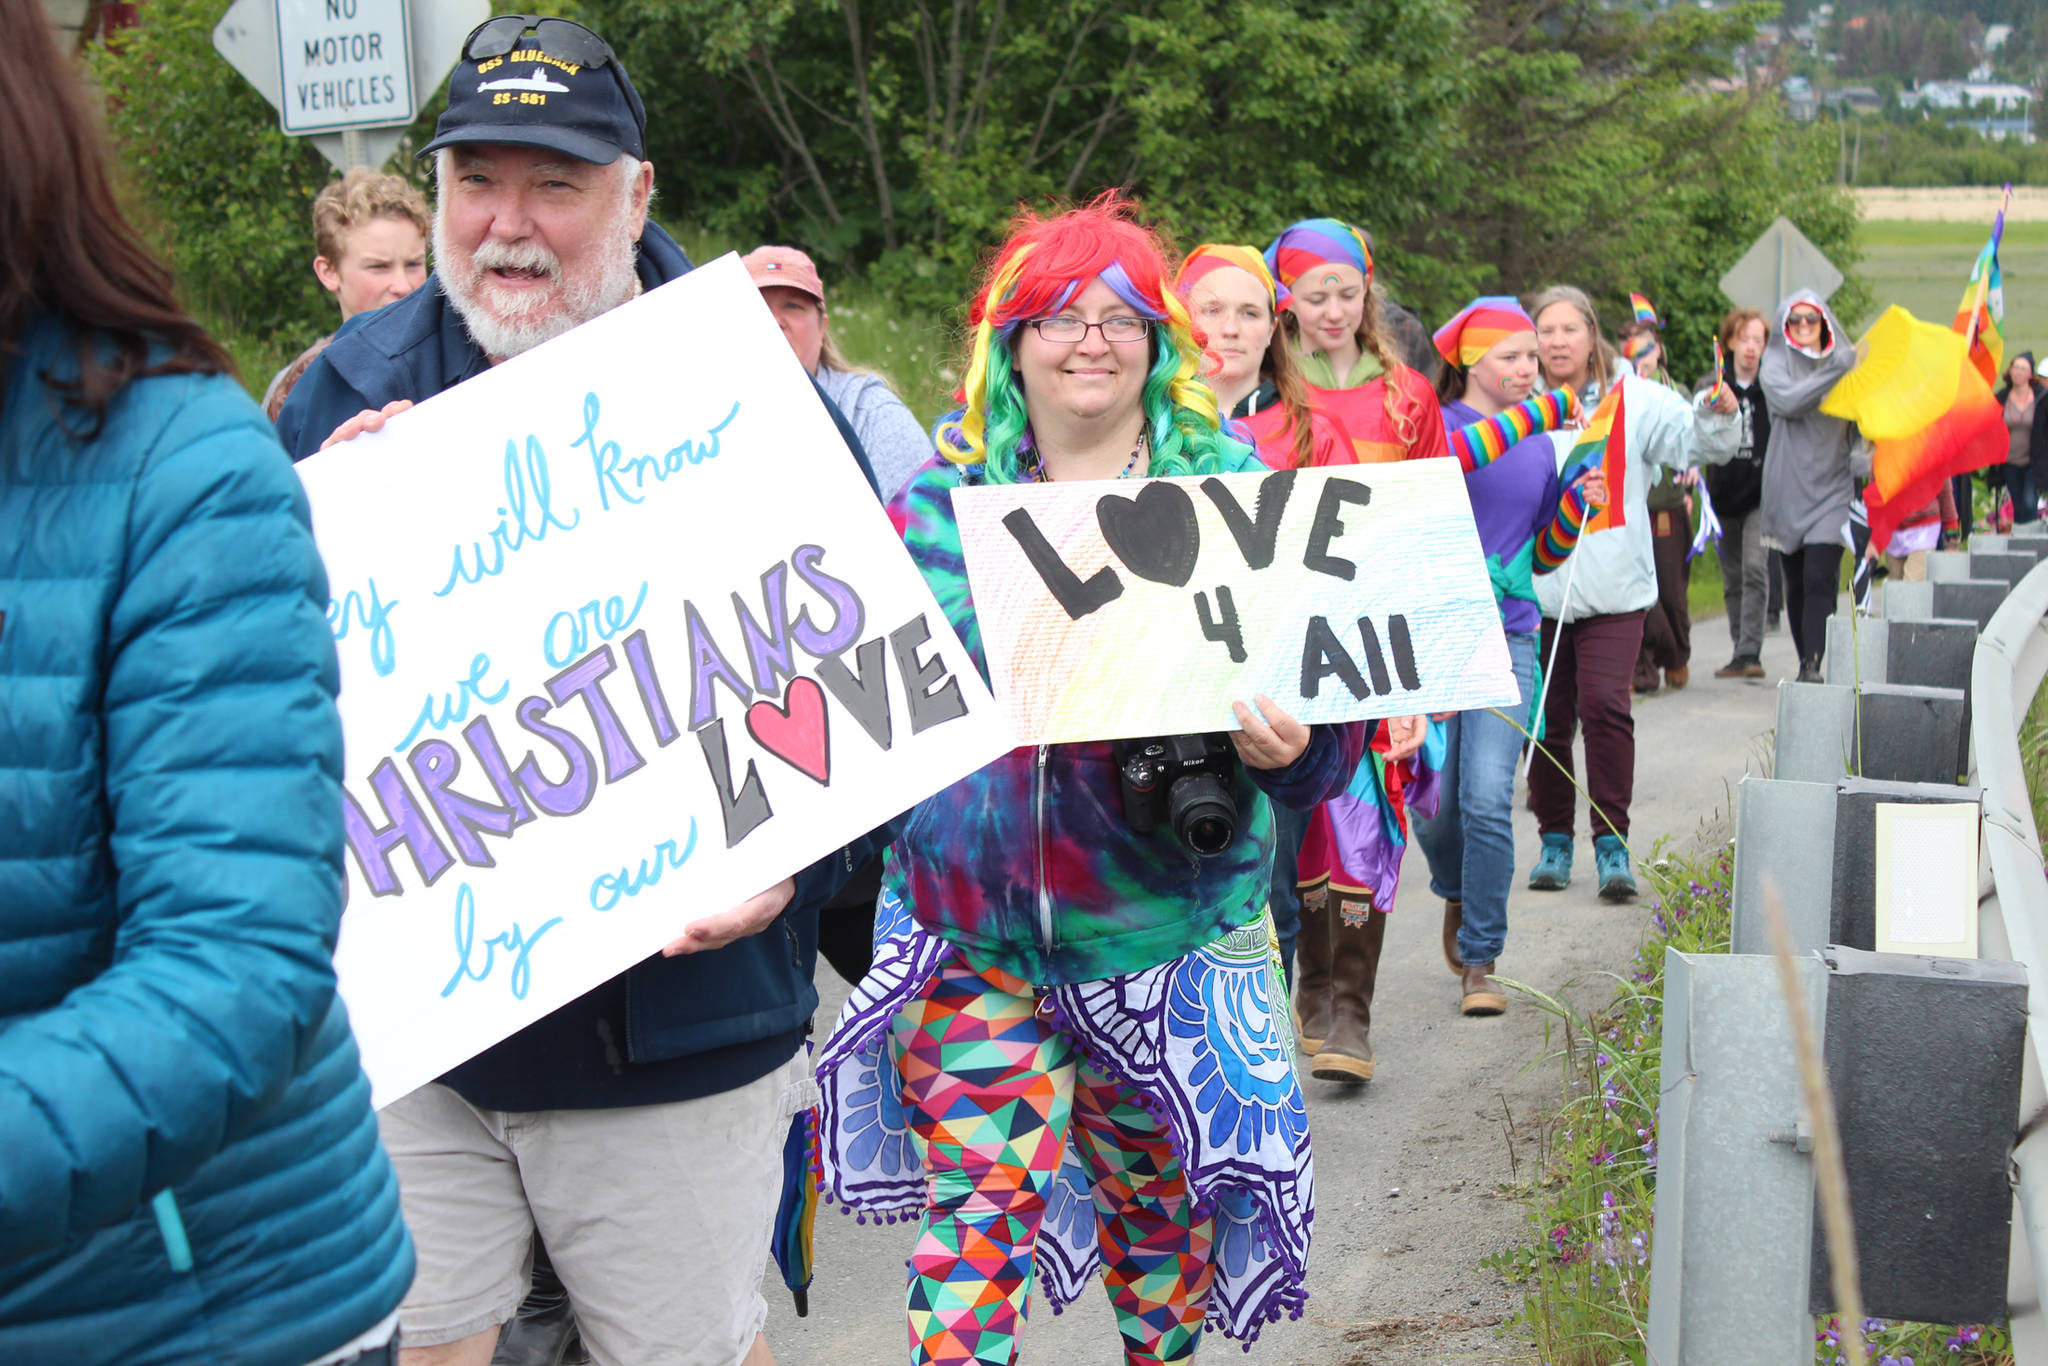 Participants in the Saturday, June 23, 2018 Pride March walk along Ocean Drive in Homer, Alaska with signs that read: “They will know we are Christians by our love,” and “Love 4 all.” About 280 people turned out for the inaugural march. (Photo by Megan Pacer/Homer News)